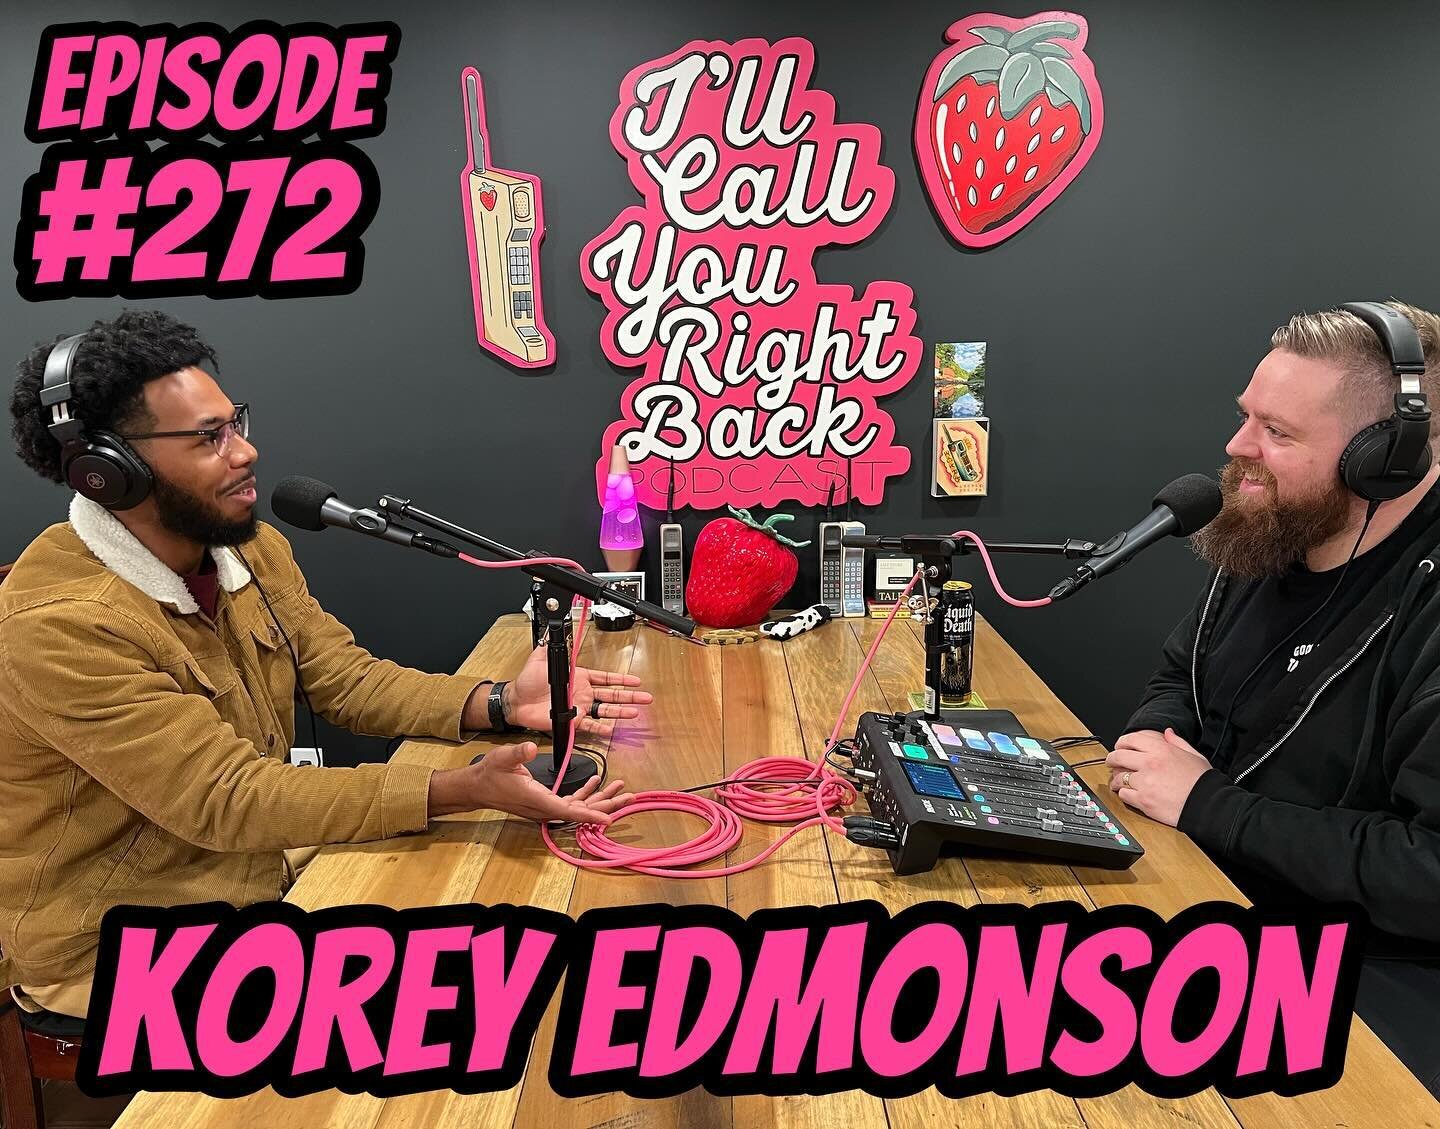 This week, I sit down with the very talented @koreytheartist to speak about his journey into becoming the artist he is today. He stops by the studio and we talk about everything from growing up and being unfocused to how he made his choice to hone hi